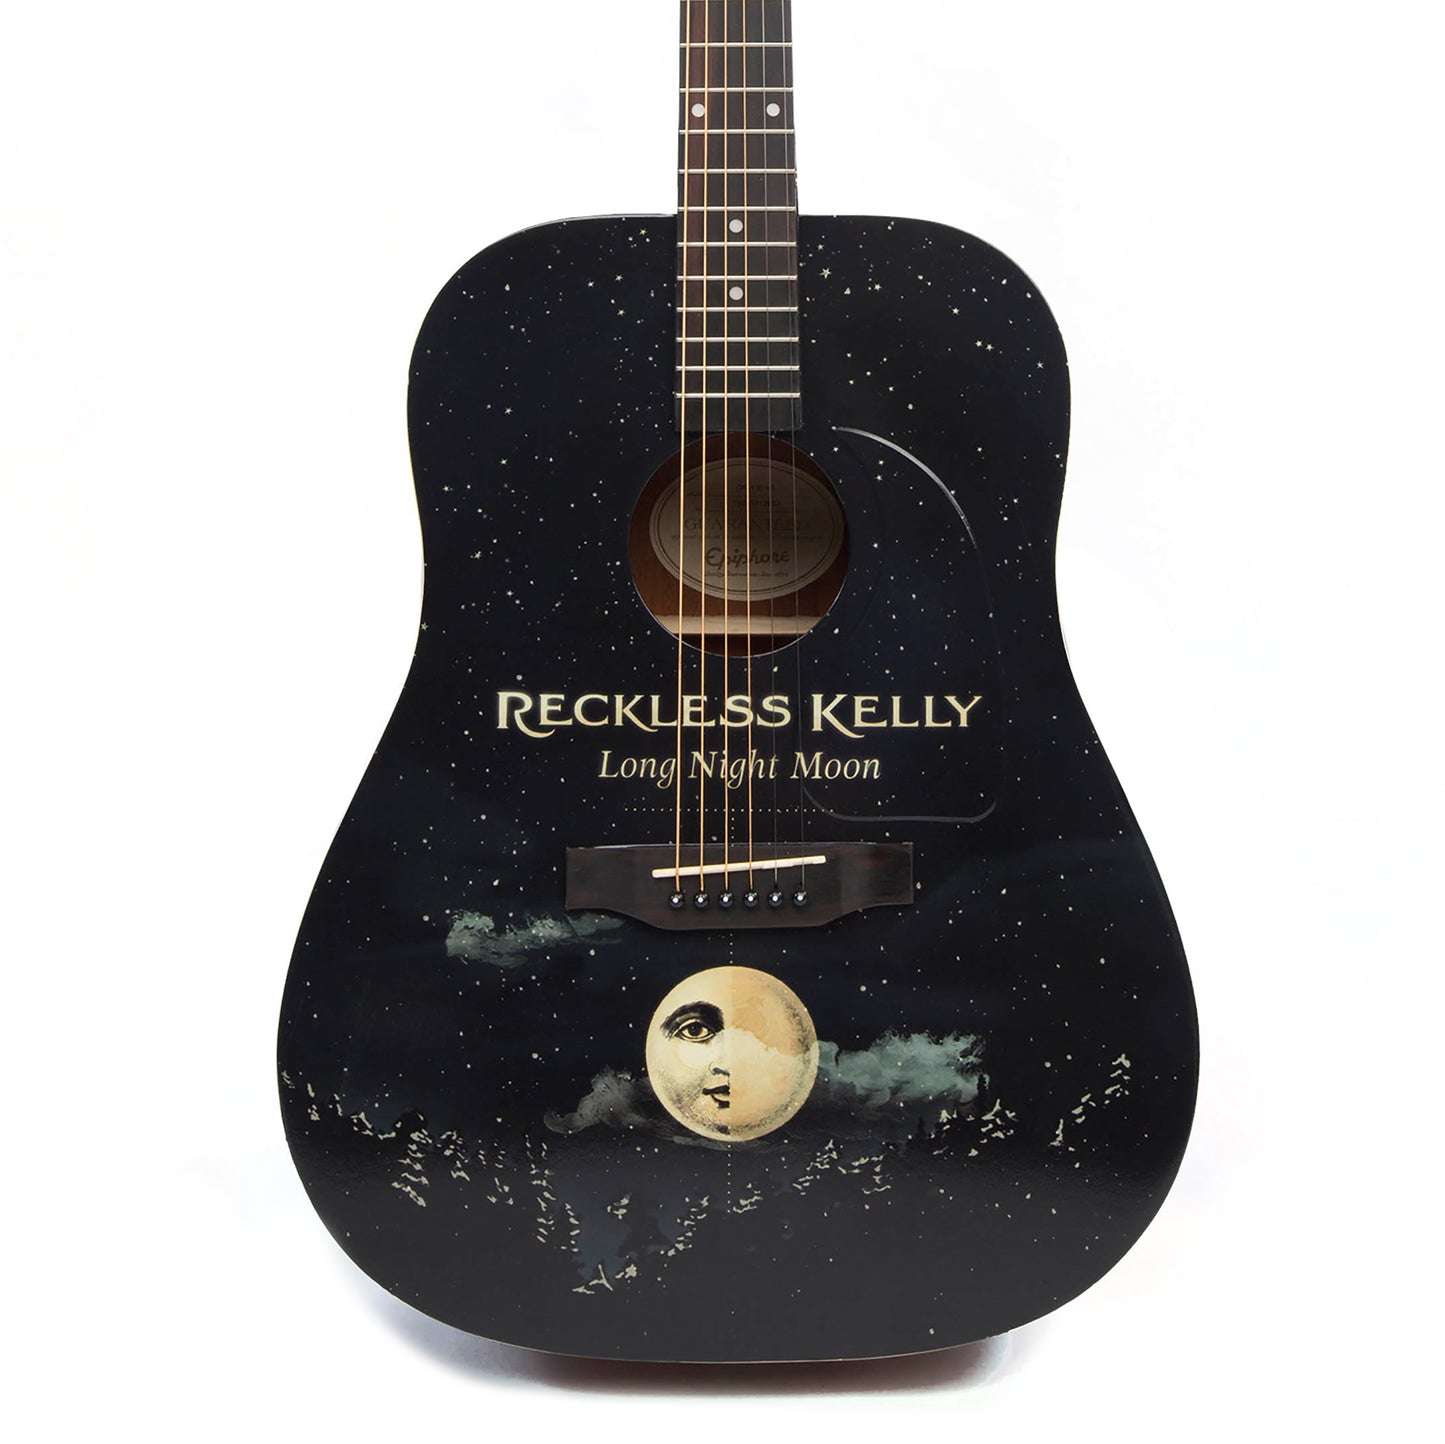 Long Night Moon Guitar - AUTOGRAPHED BY RECKLESS KELLY